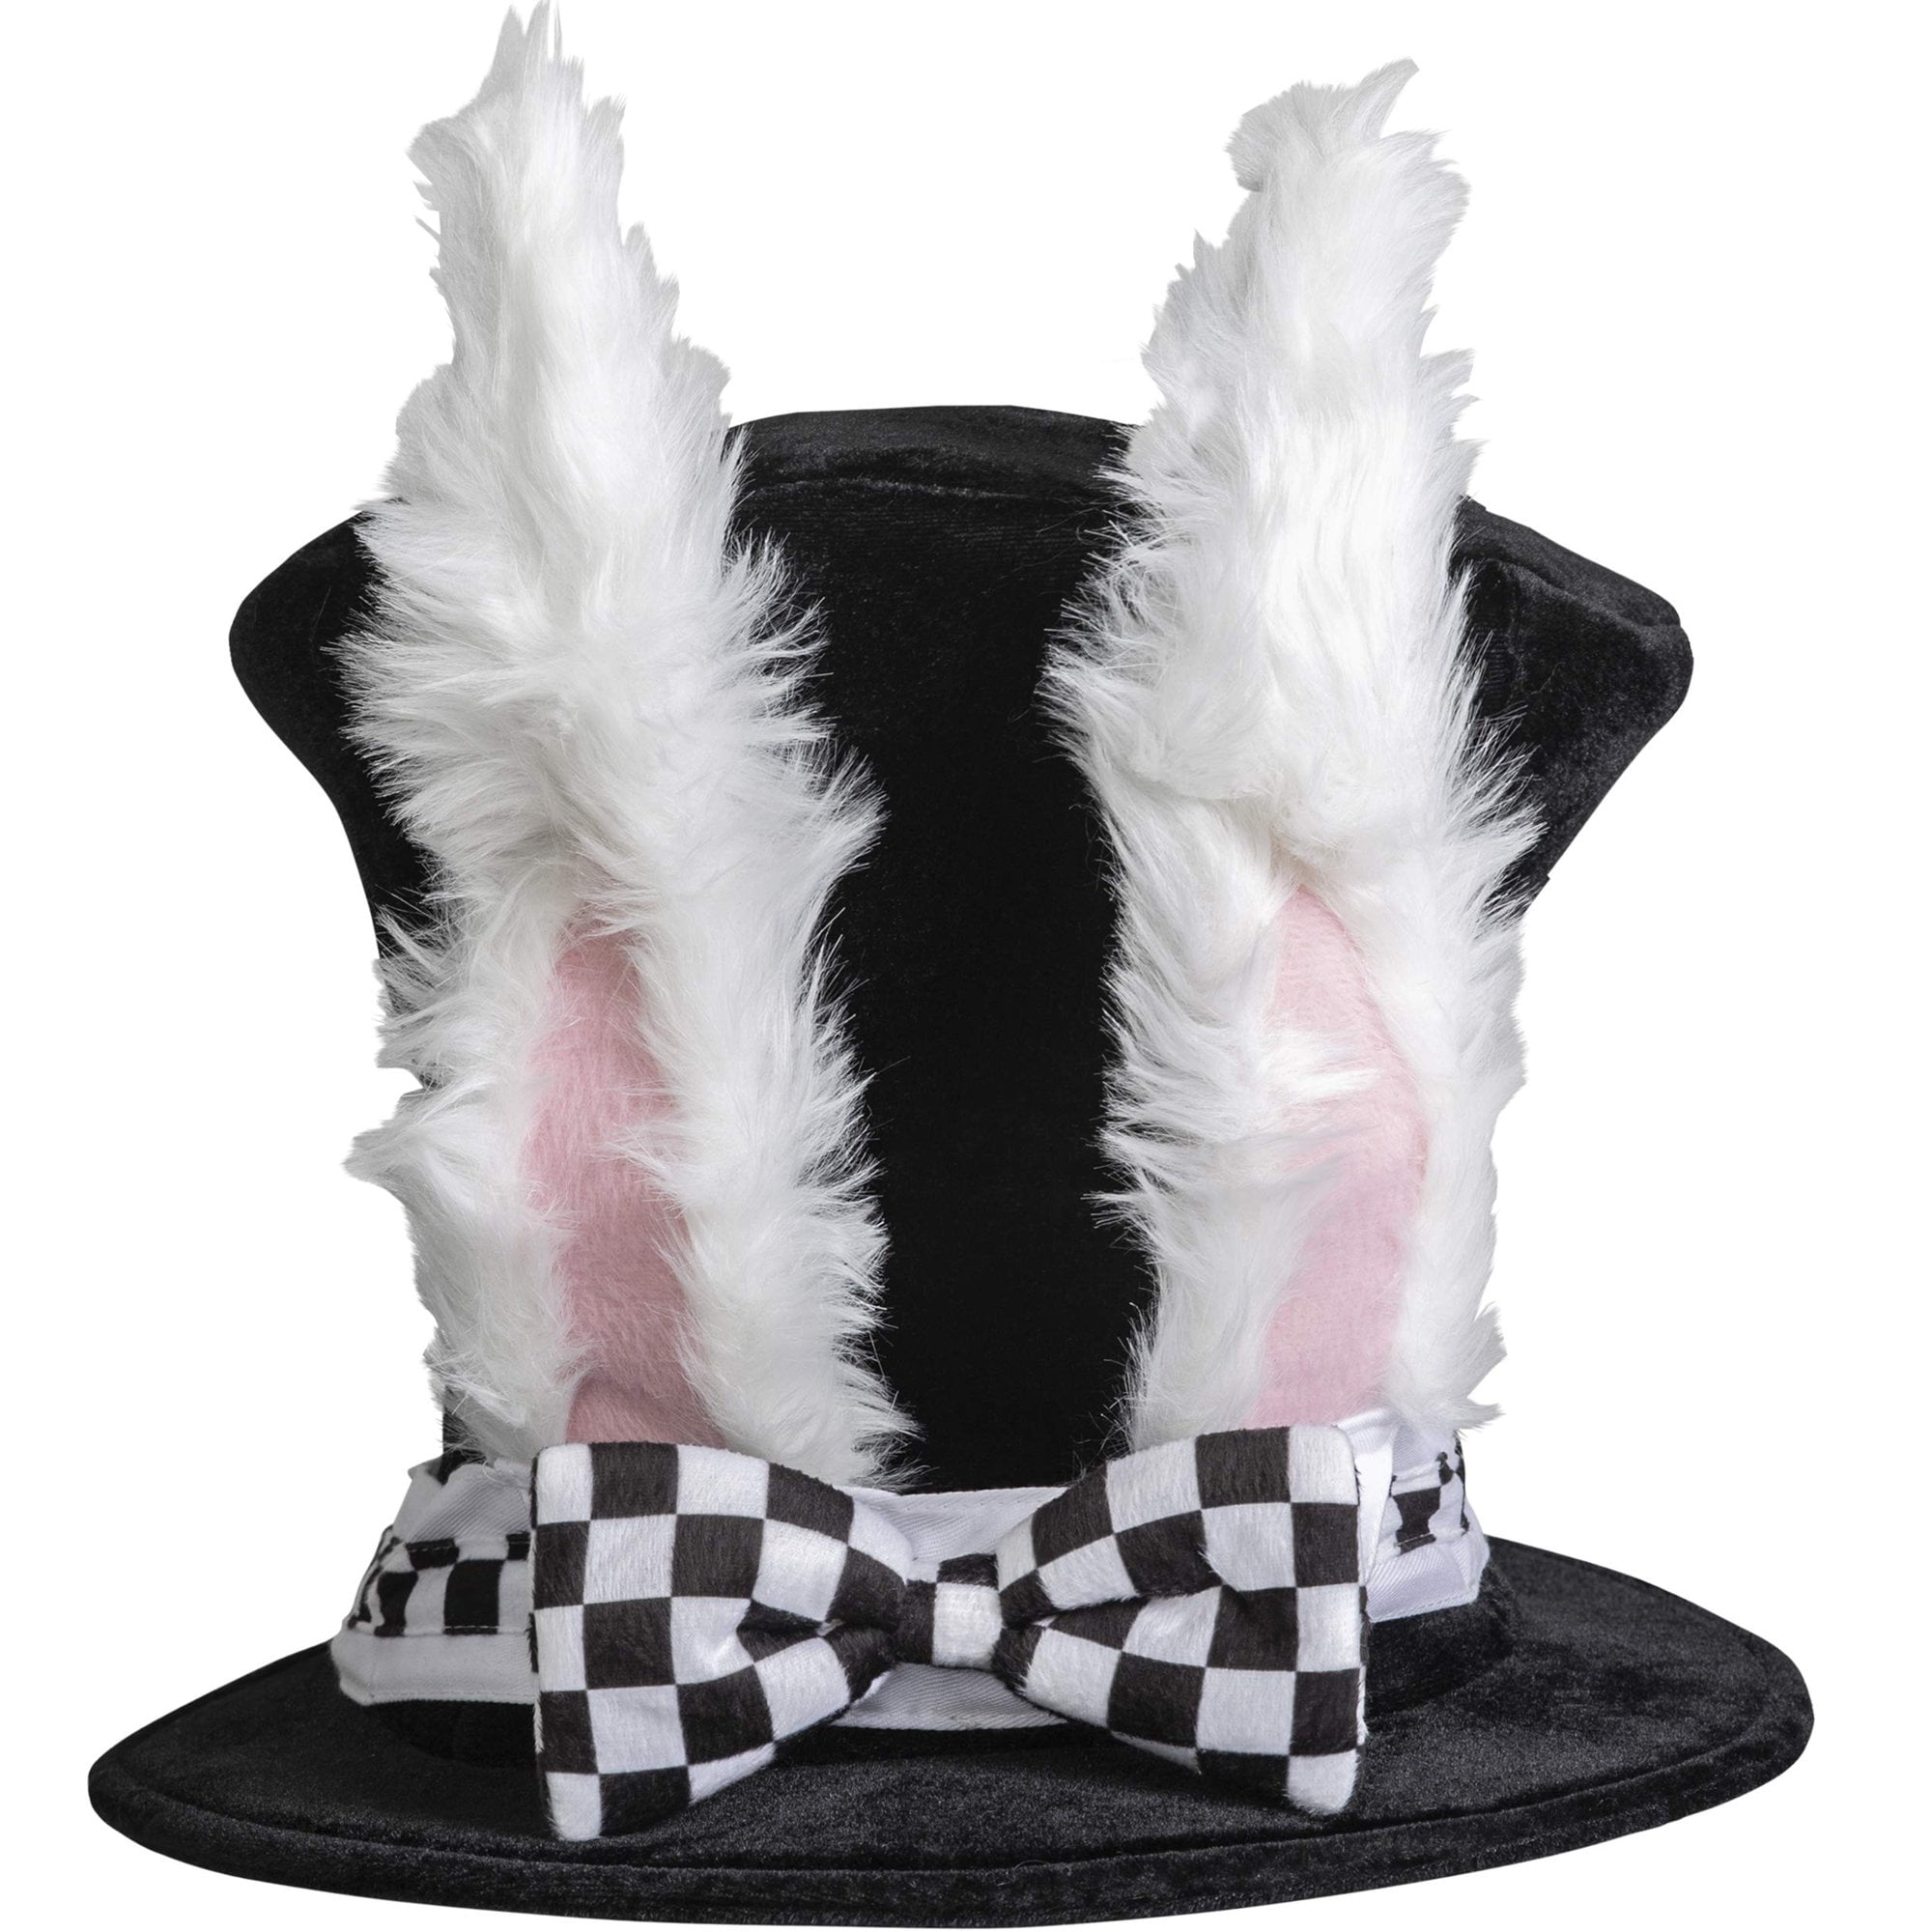 WHITE RABBIT TOP HAT BUNNY EARS AND NOSE FANCY DRESS COSTUME OUTFIT BOOK DAY 